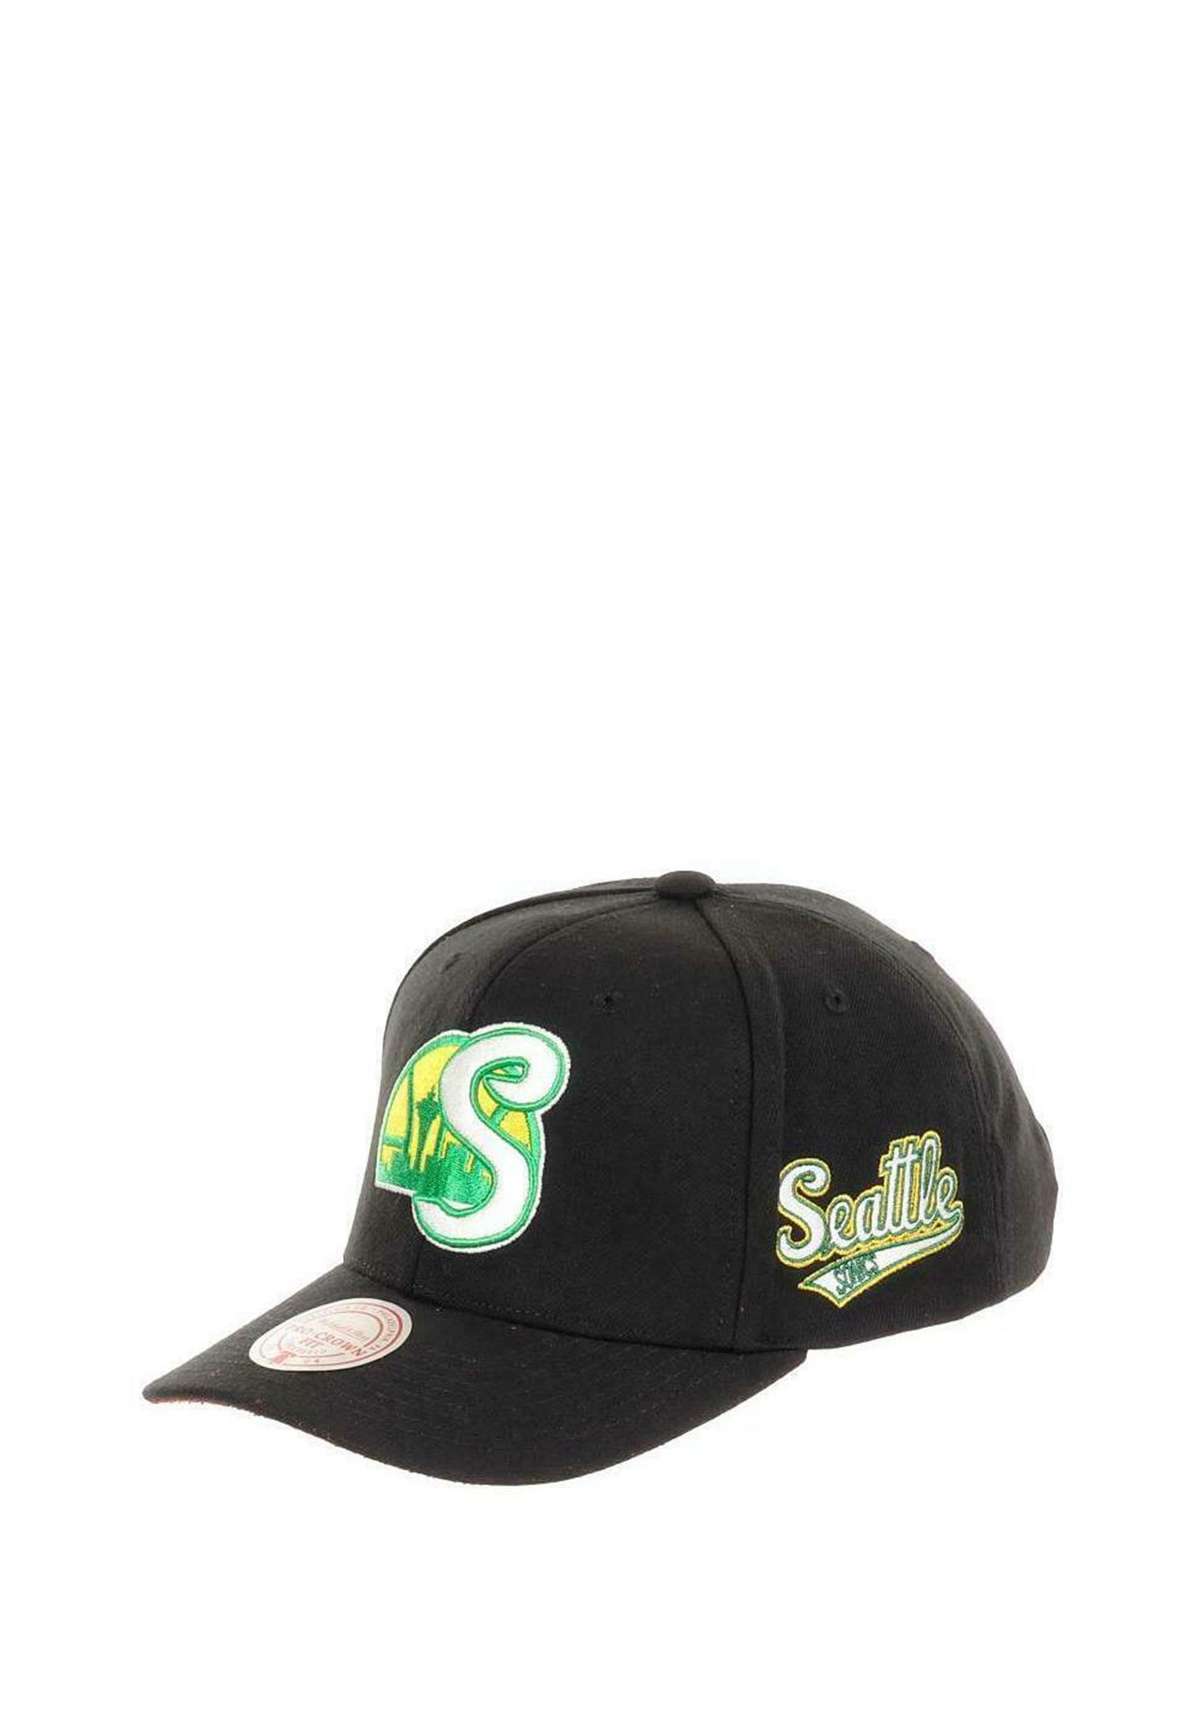 Кепка SEATTLE SUPERSONICS NBA ICON GRAIL PRO SNAPBACK HARDWOOD CLAASIC PRO CROWN FIT